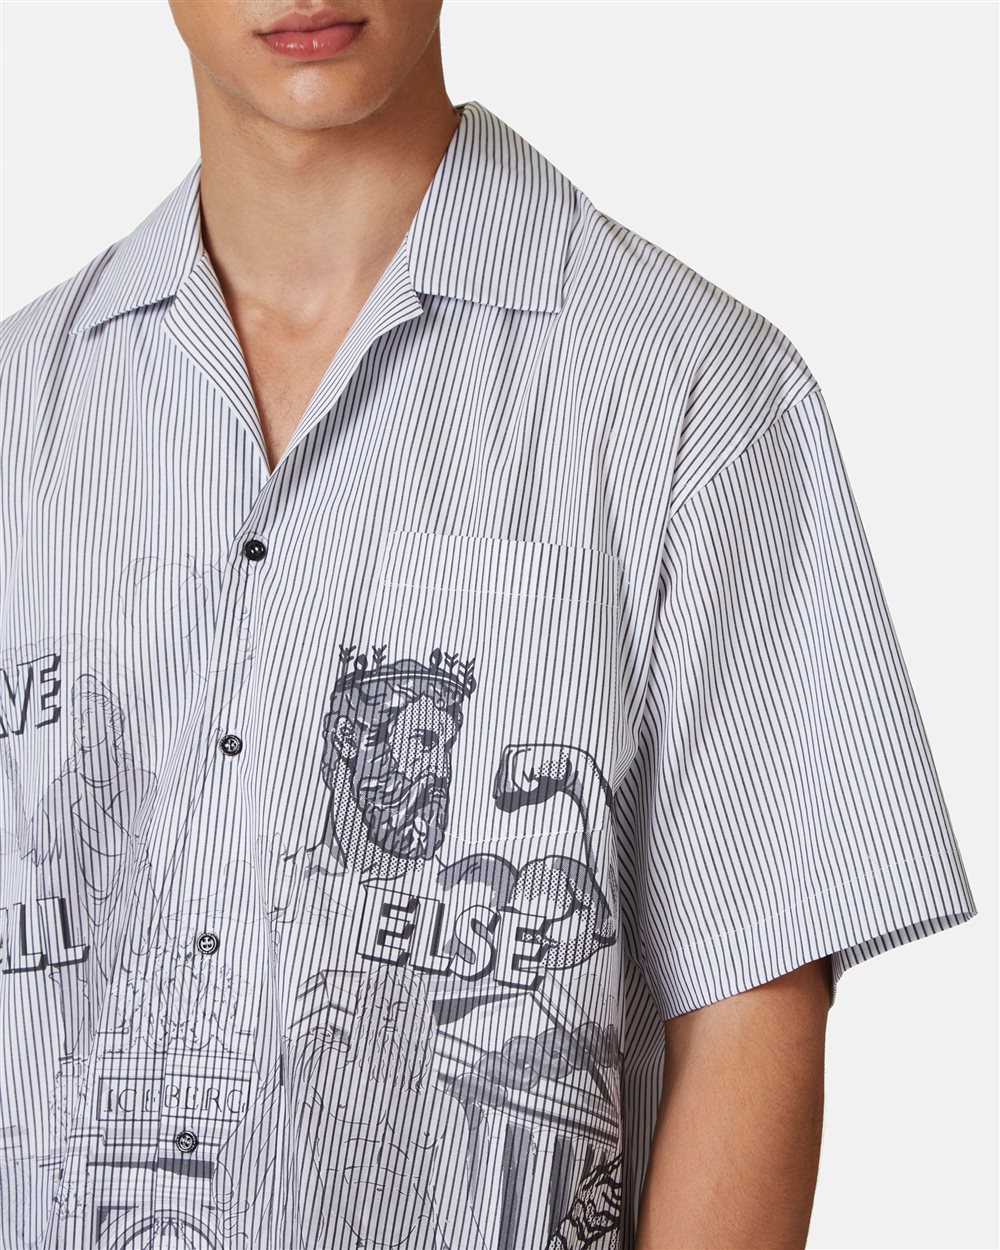 Shirt with Rome prints - Iceberg - Official Website